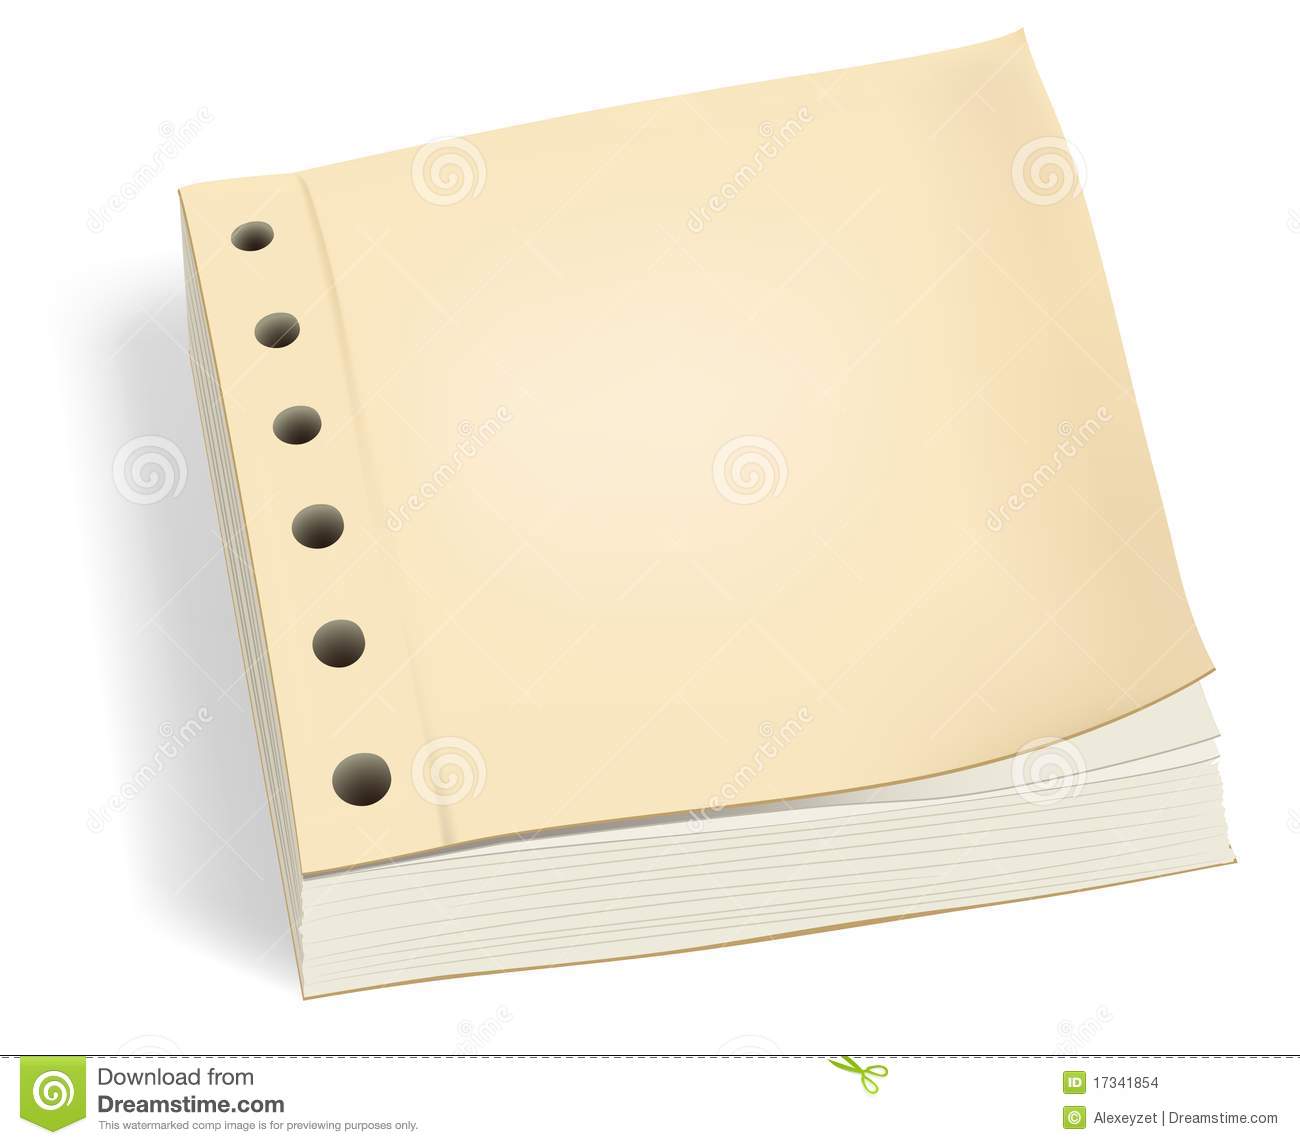 Bundle Of Paper With Holes Or Ledger Book Stock Images   Image    